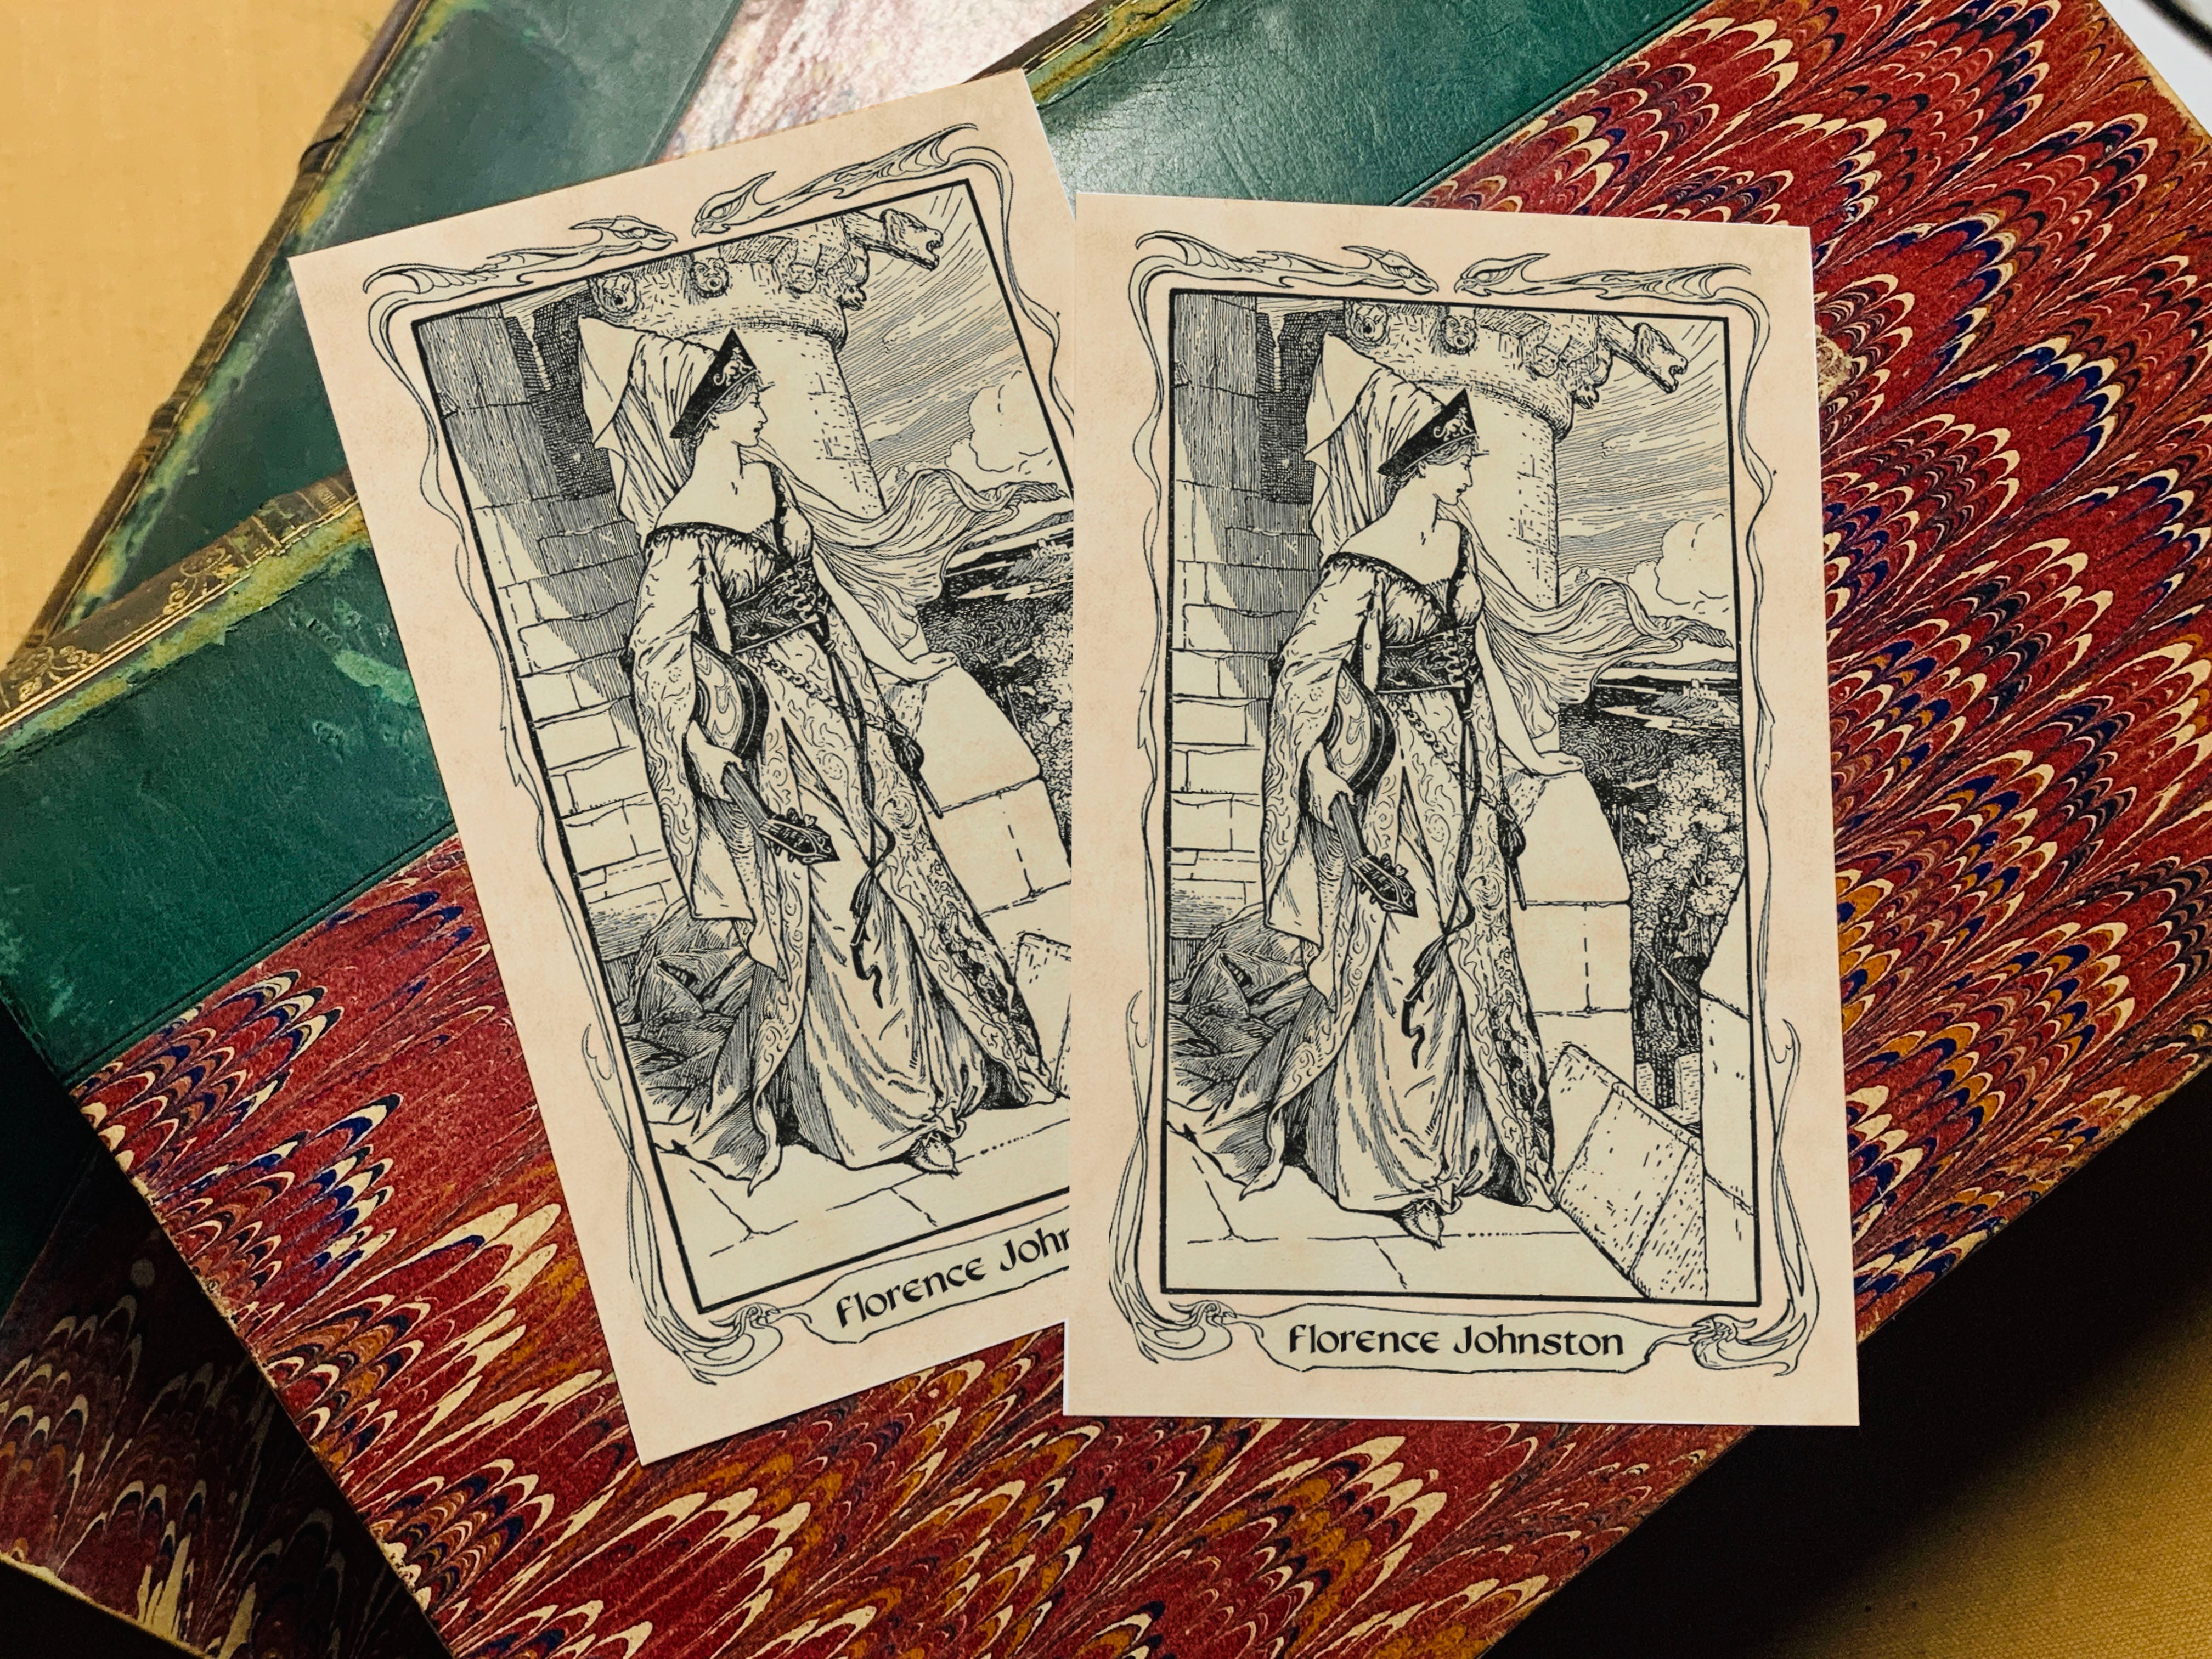 Princess Bard, Personalized Ex-Libris Bookplates, Crafted on Traditional Gummed Paper, 2.5in x 4in, Set of 30